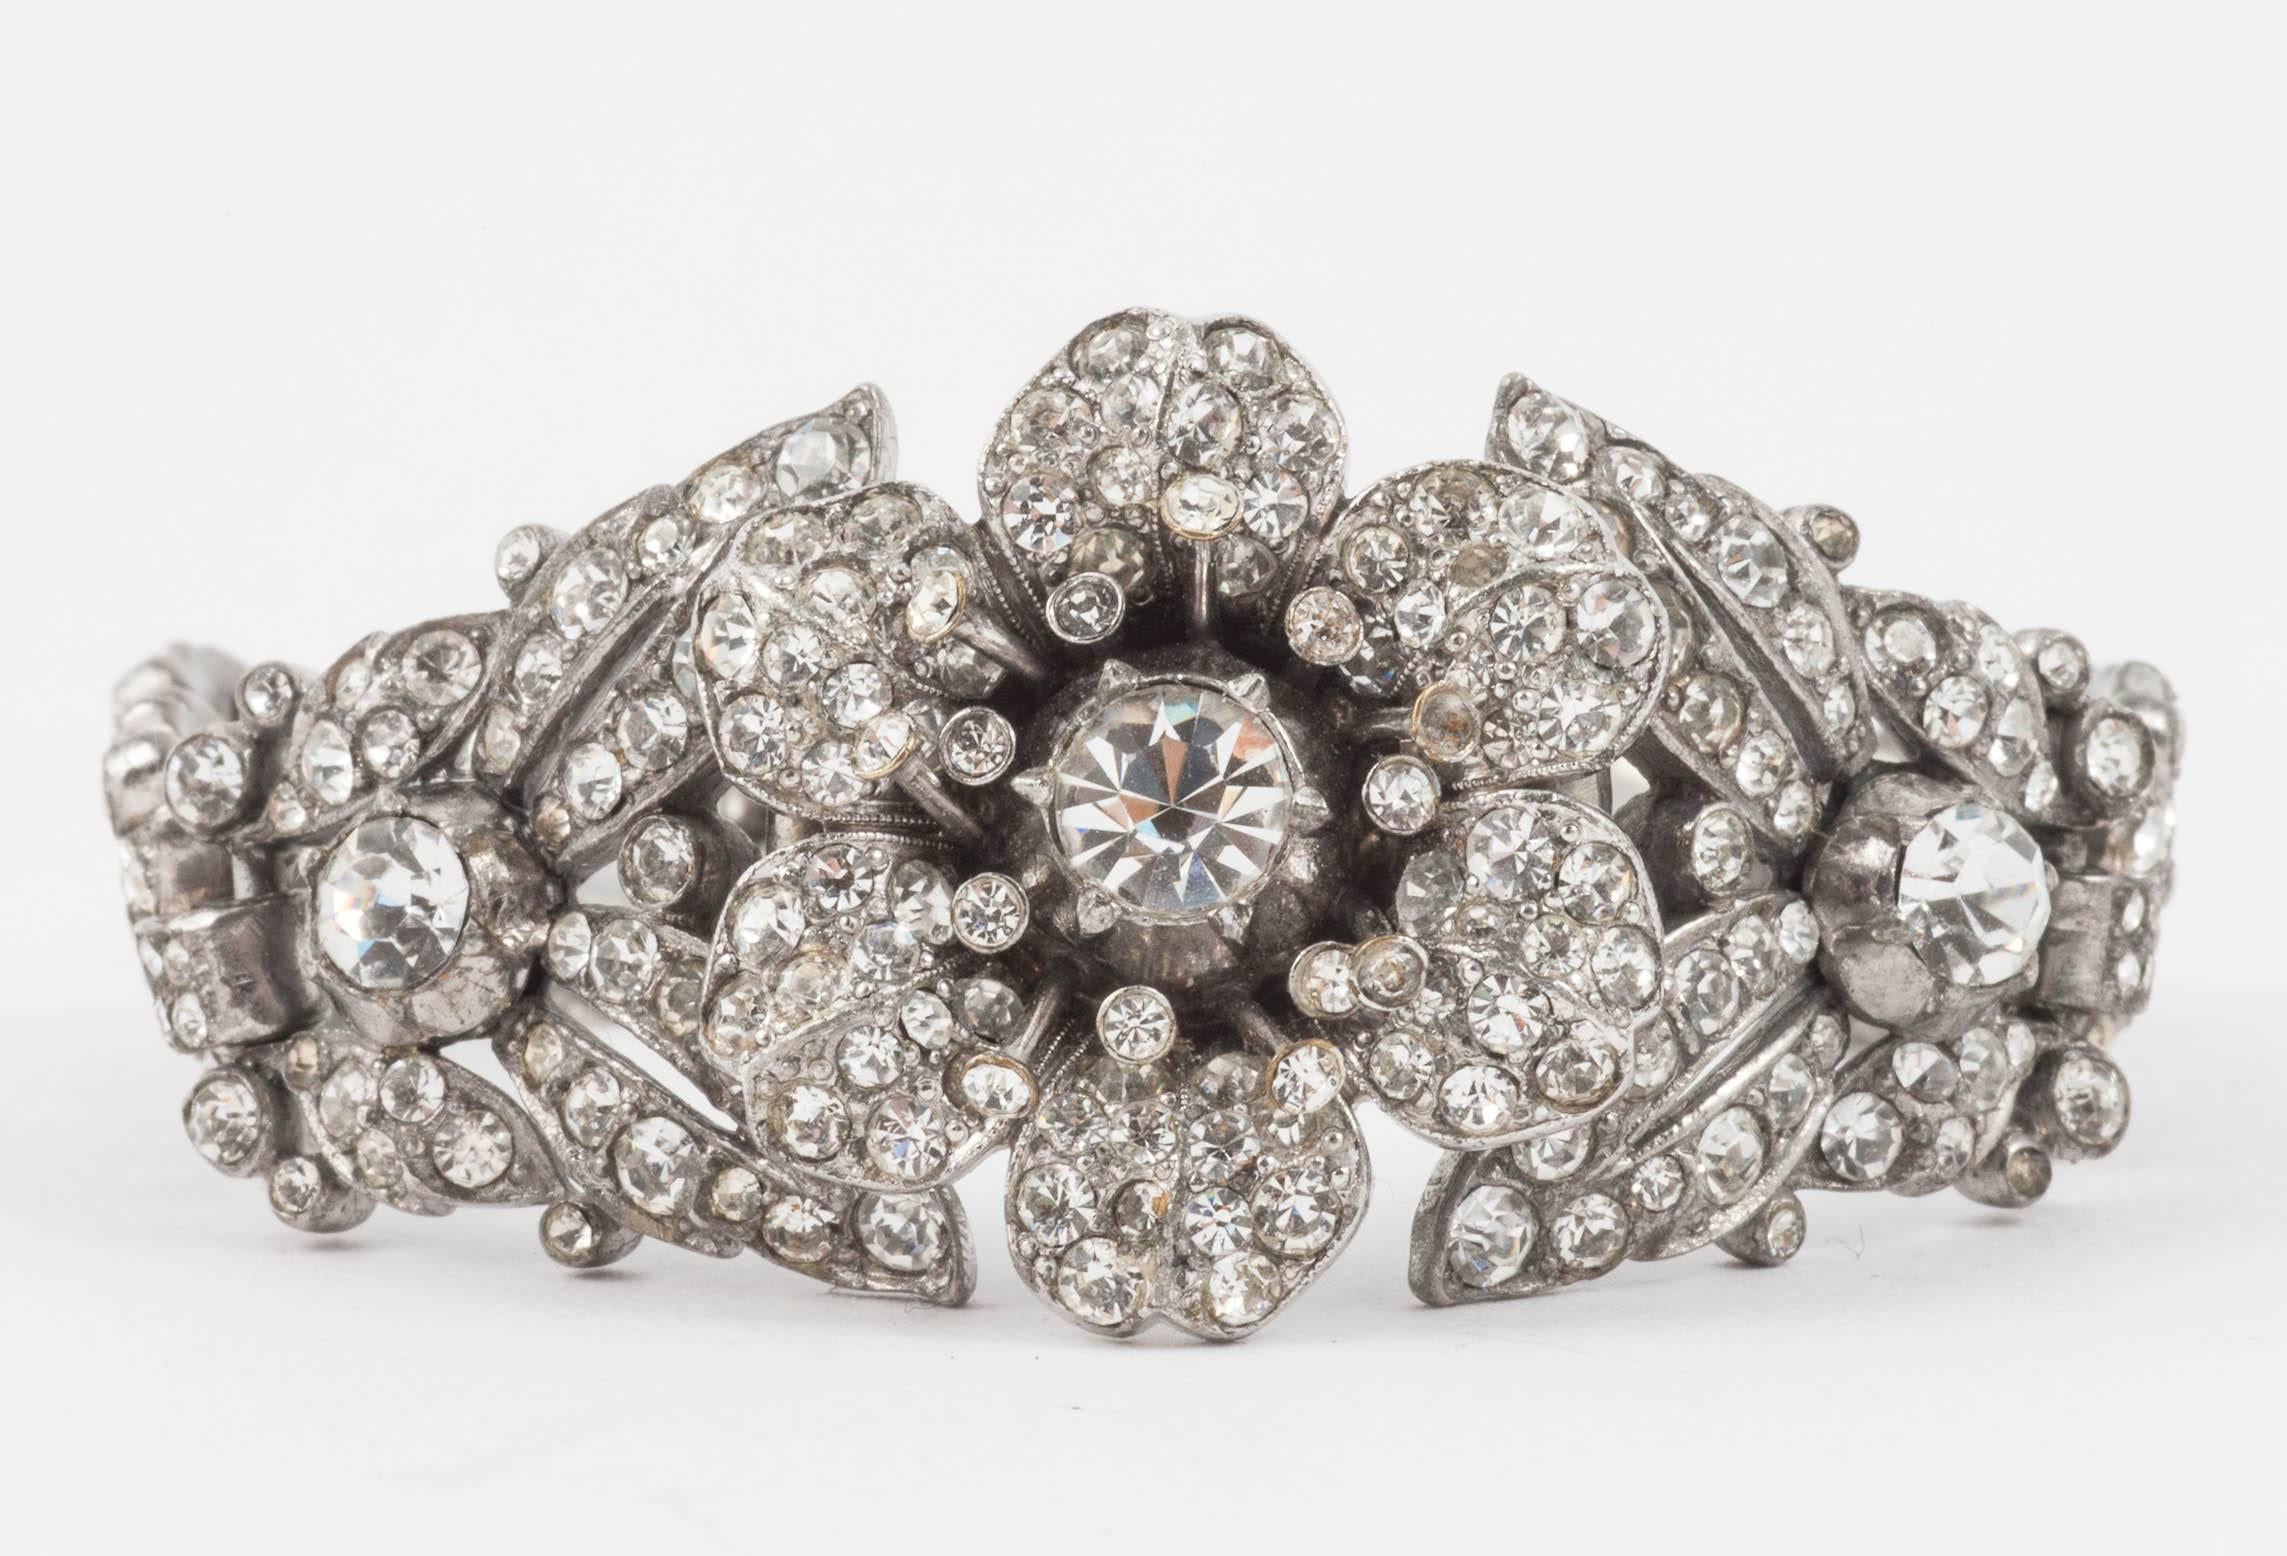 Charming , wearable paste bracelet designed by Alfred Philippe for Trifari, in the 1930s, Art Deco floral in style with an older period charm. Although unsigned, this is a typical and celebrated Trifari design from this period.
The firm of Trifari 